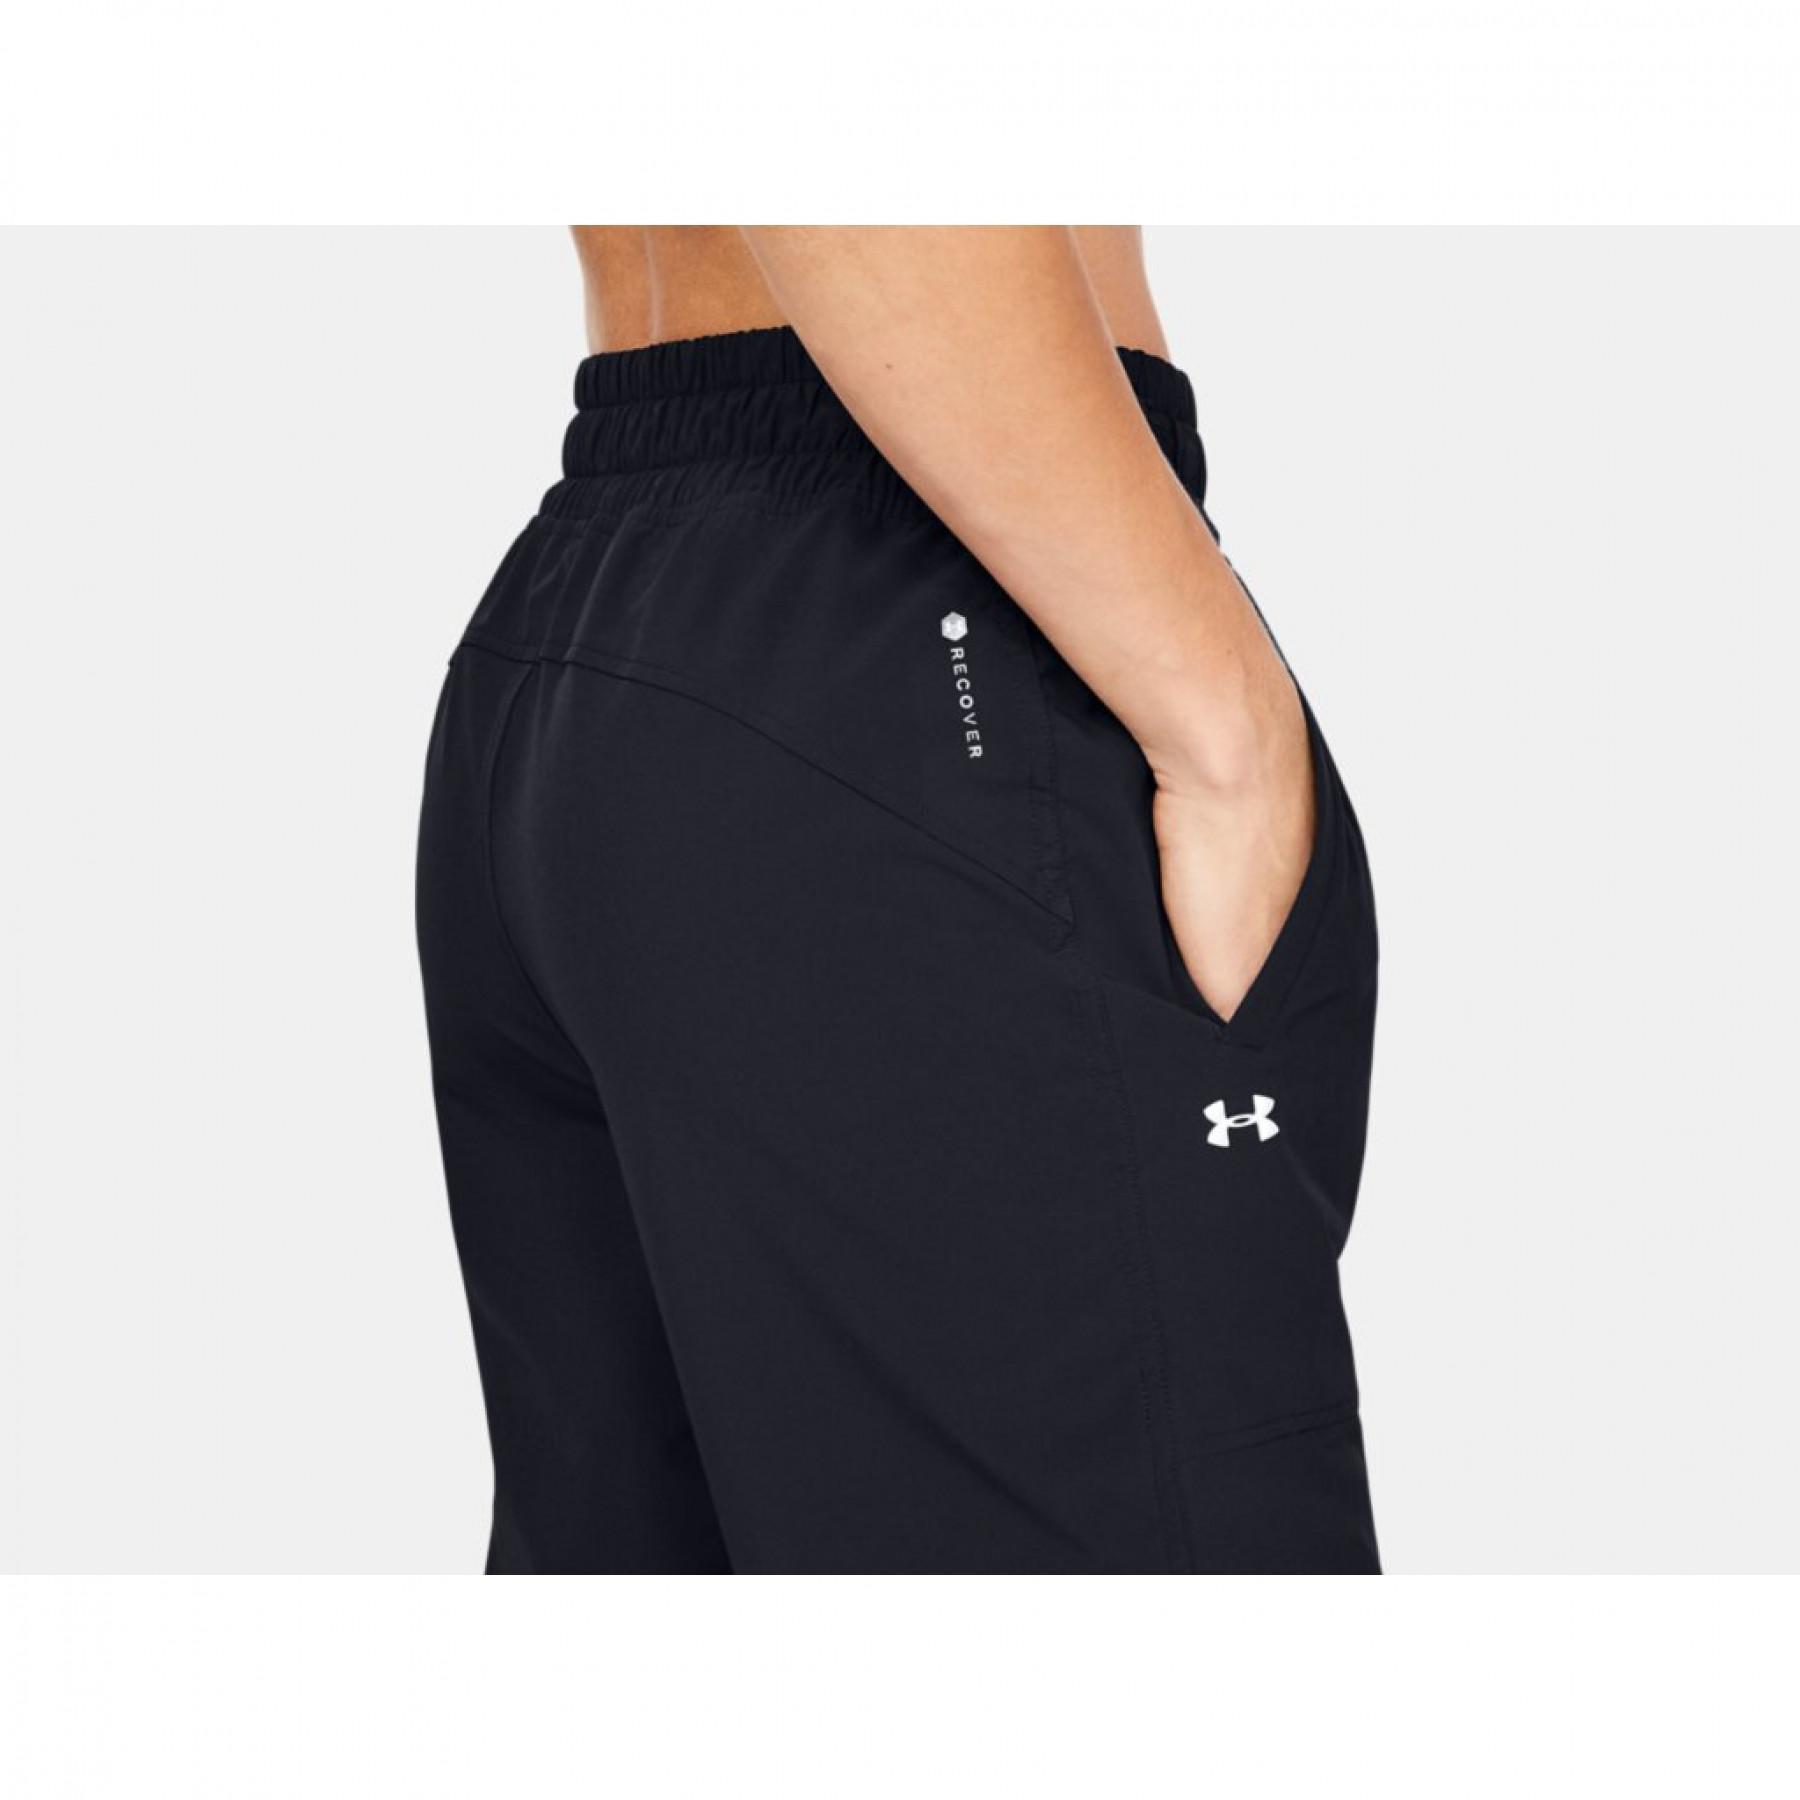 Women's trousers Under Armour Recover Woven